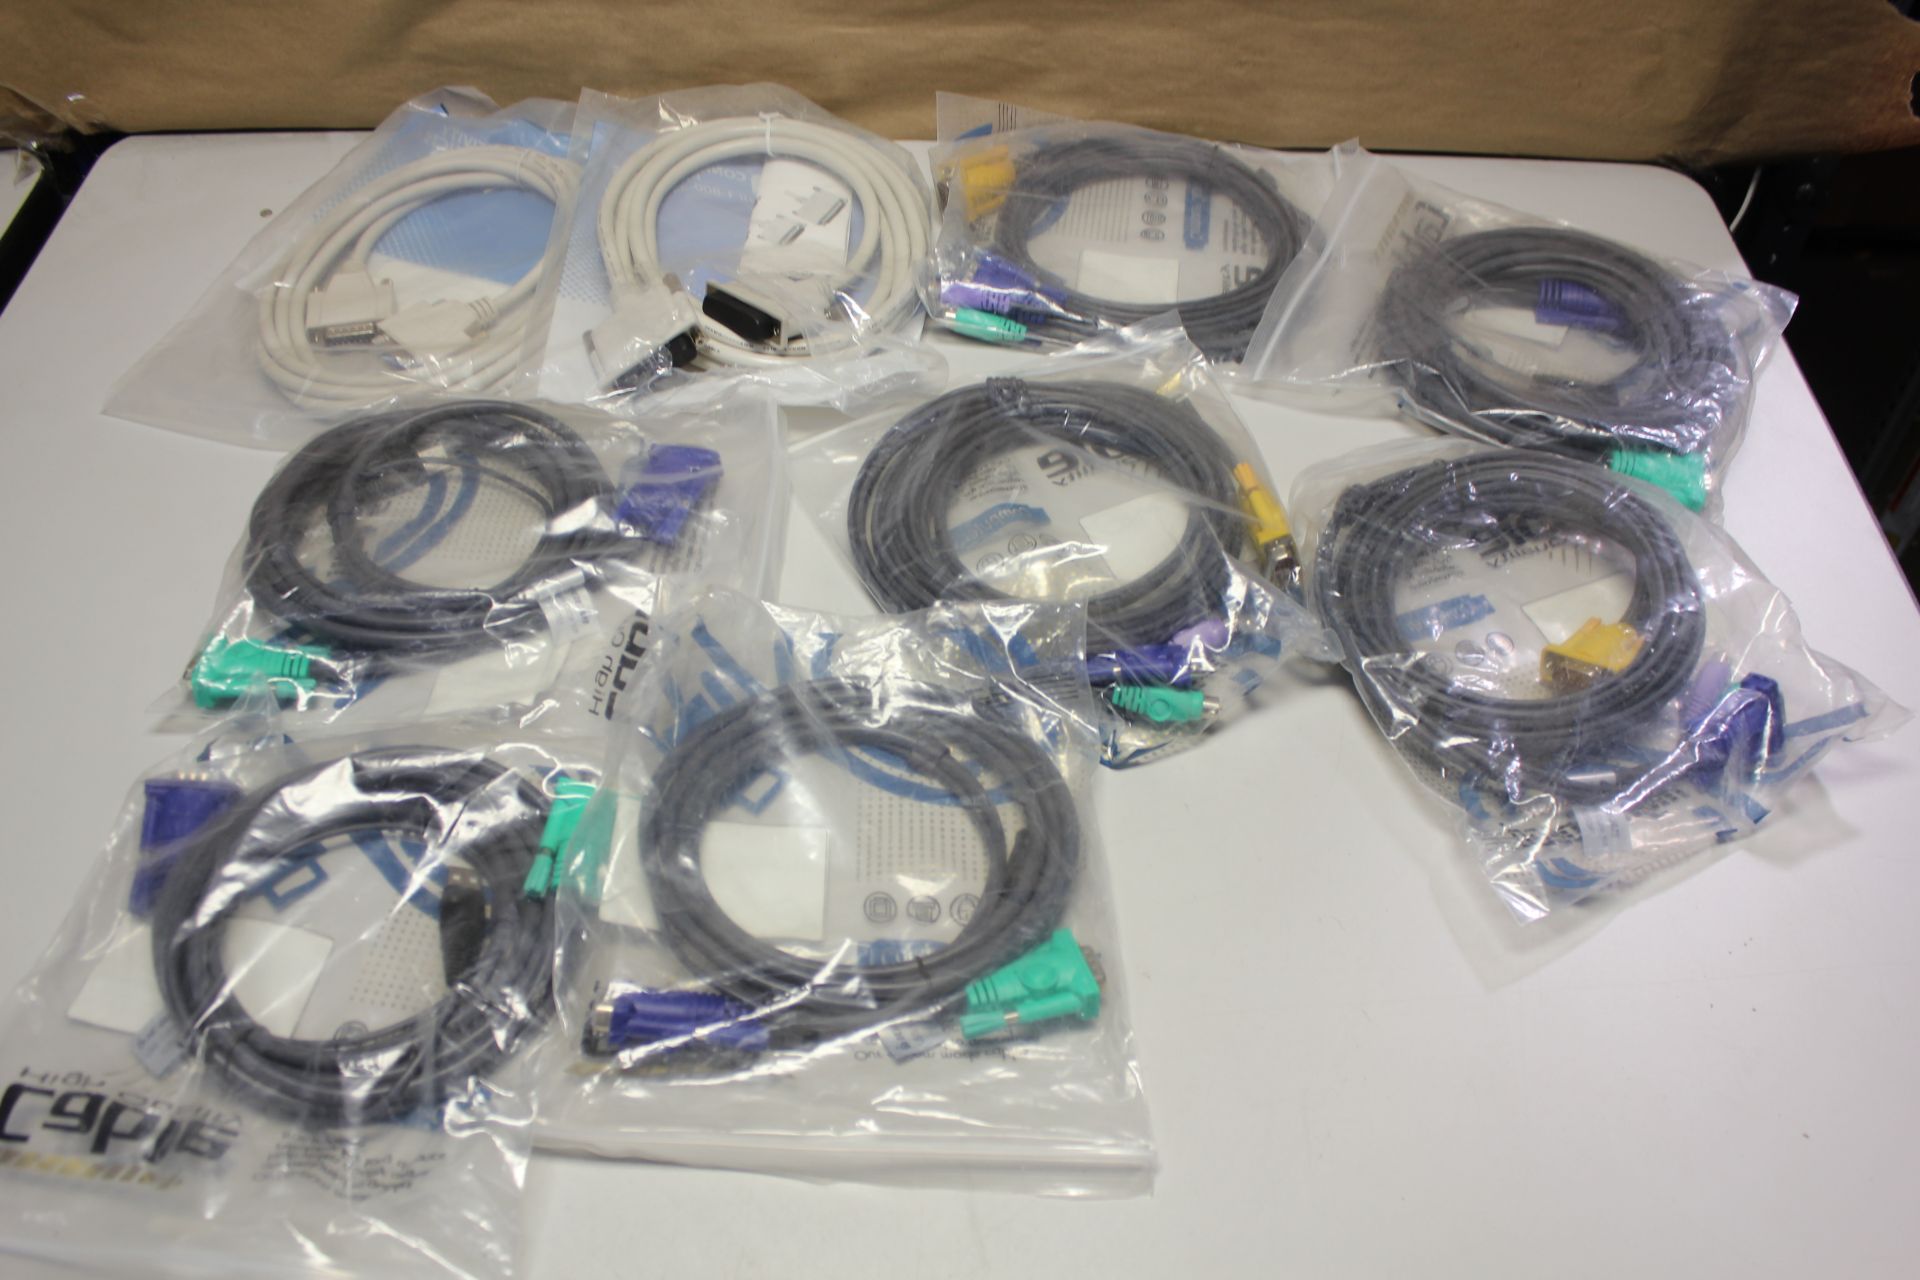 LOT OF NEW CABLES USB, KVM, PS2 - Image 7 of 11